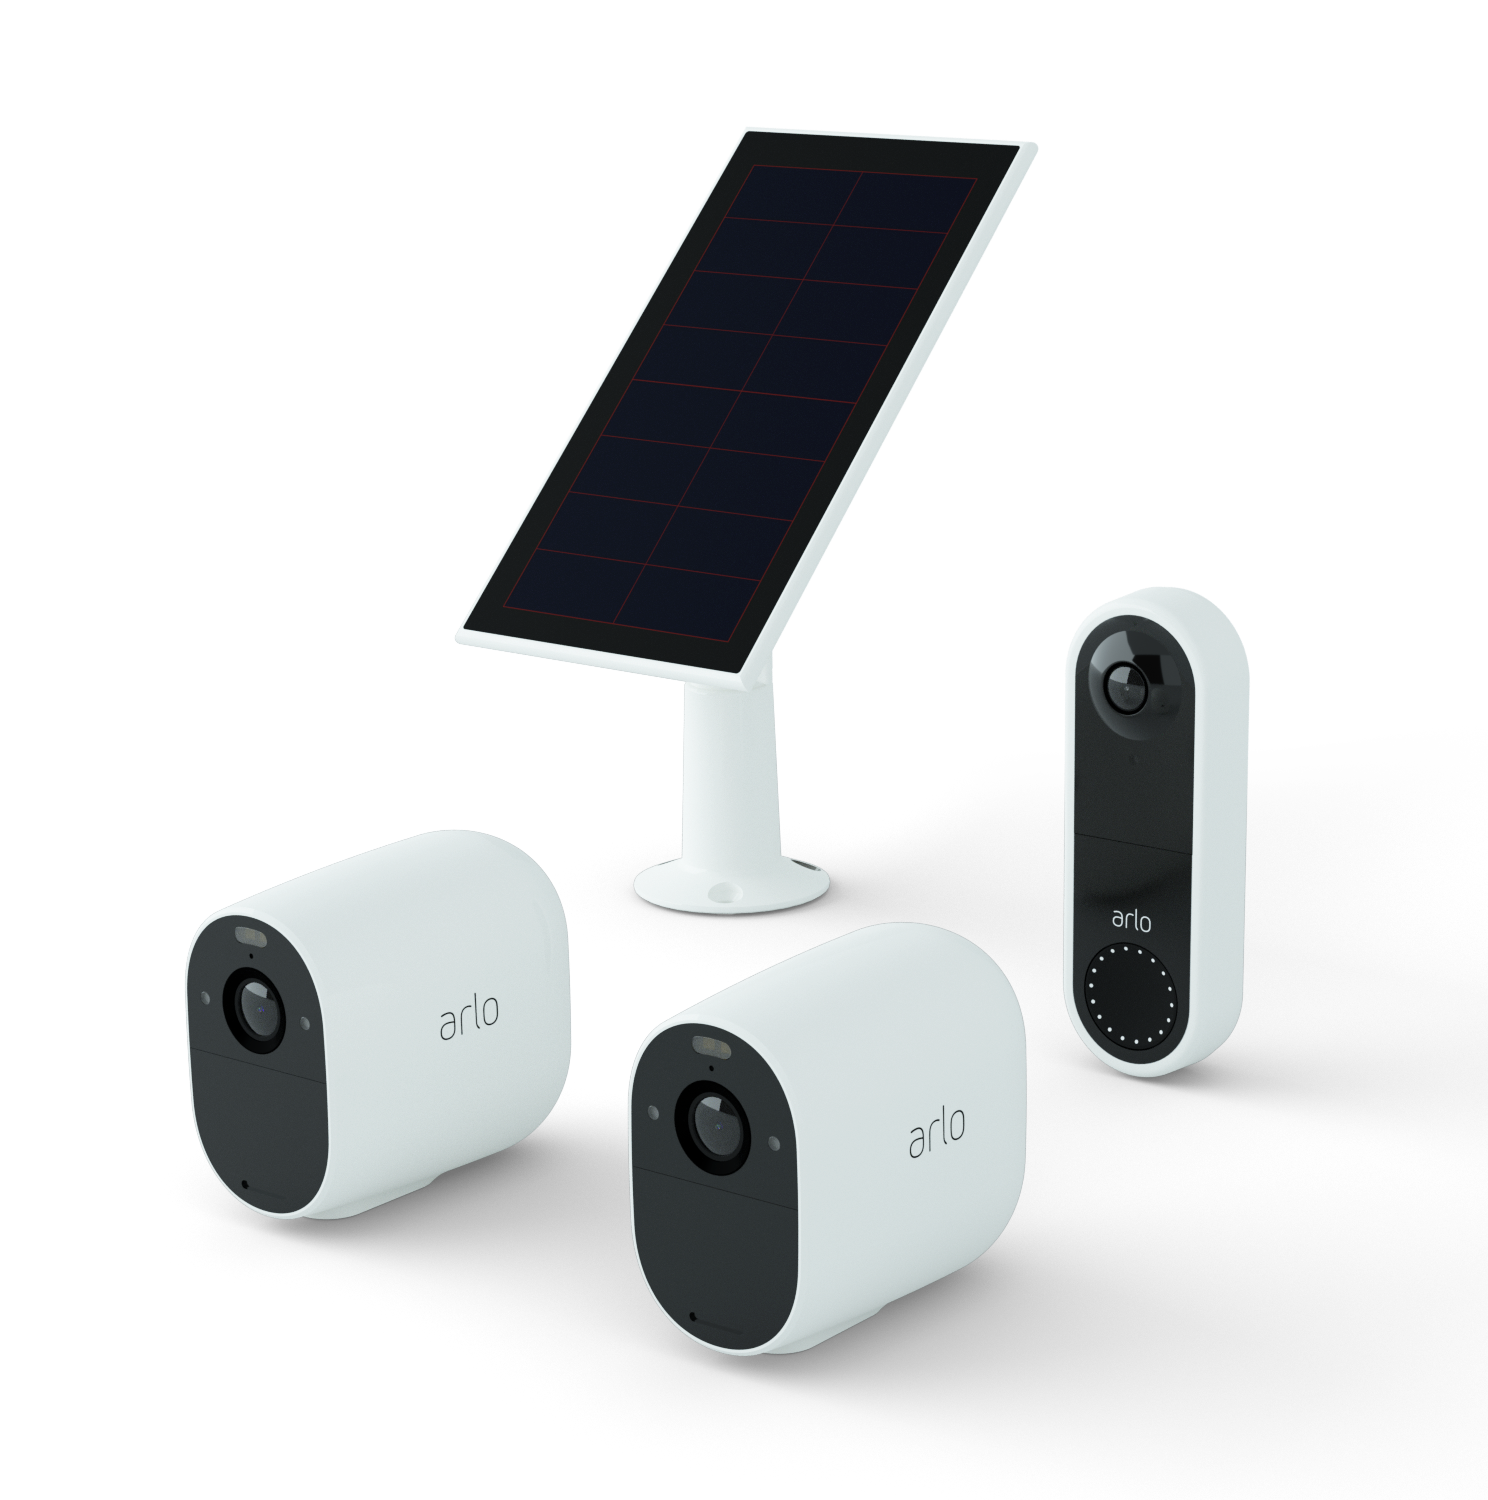 The Arlo white and black wireless video doorbell in profile with a link to view all Arlo doorbells